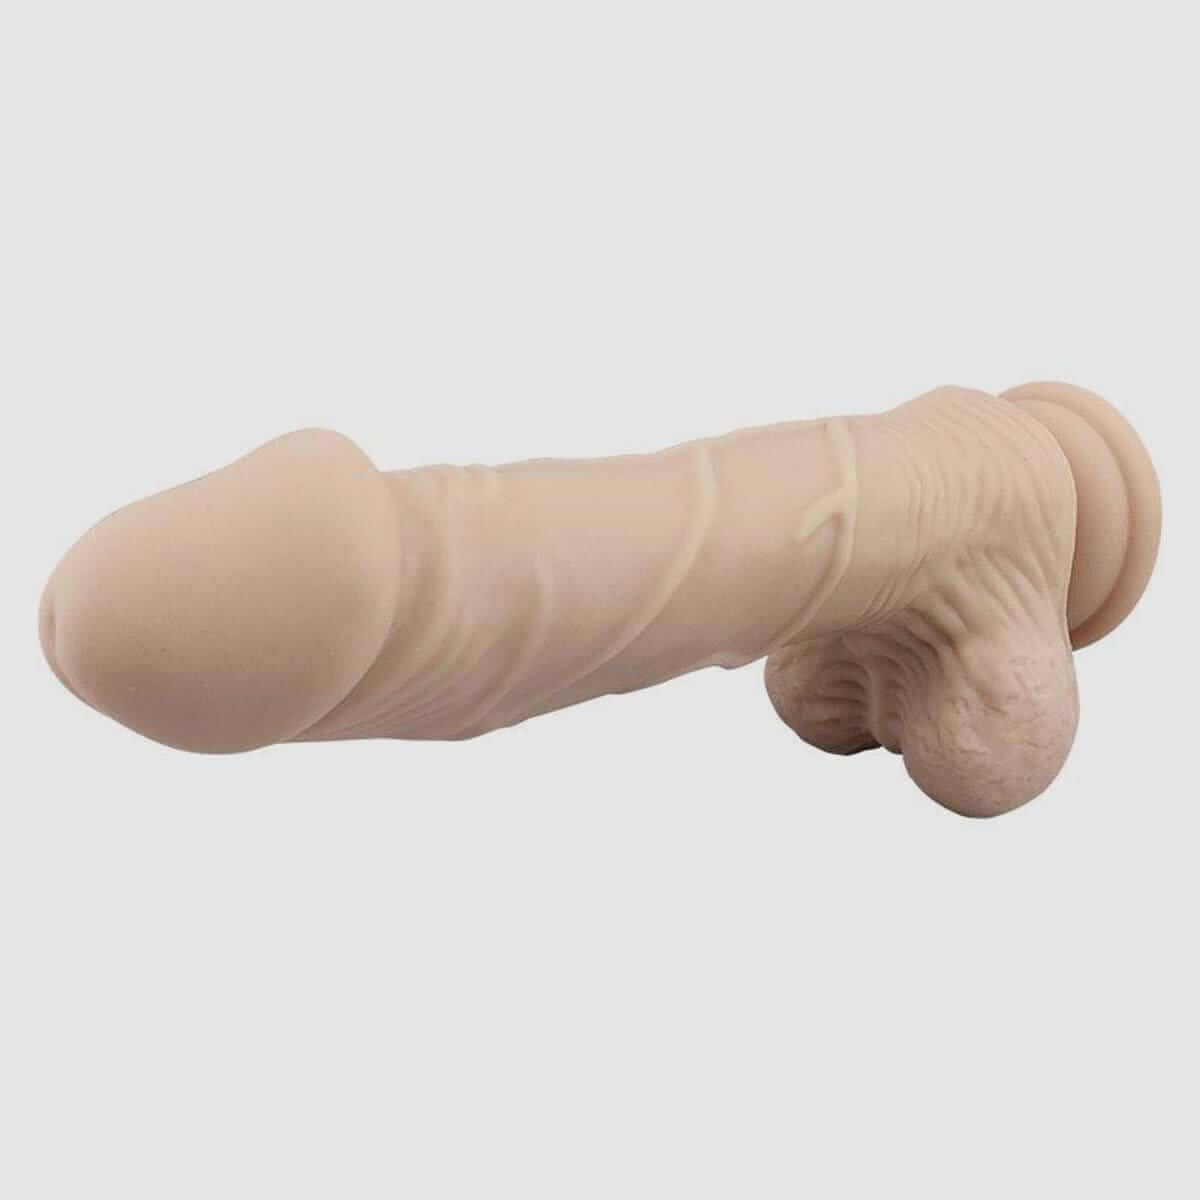 T&F knight HAPPINESS FILLER Dildo - 8" - Thorn & Feather